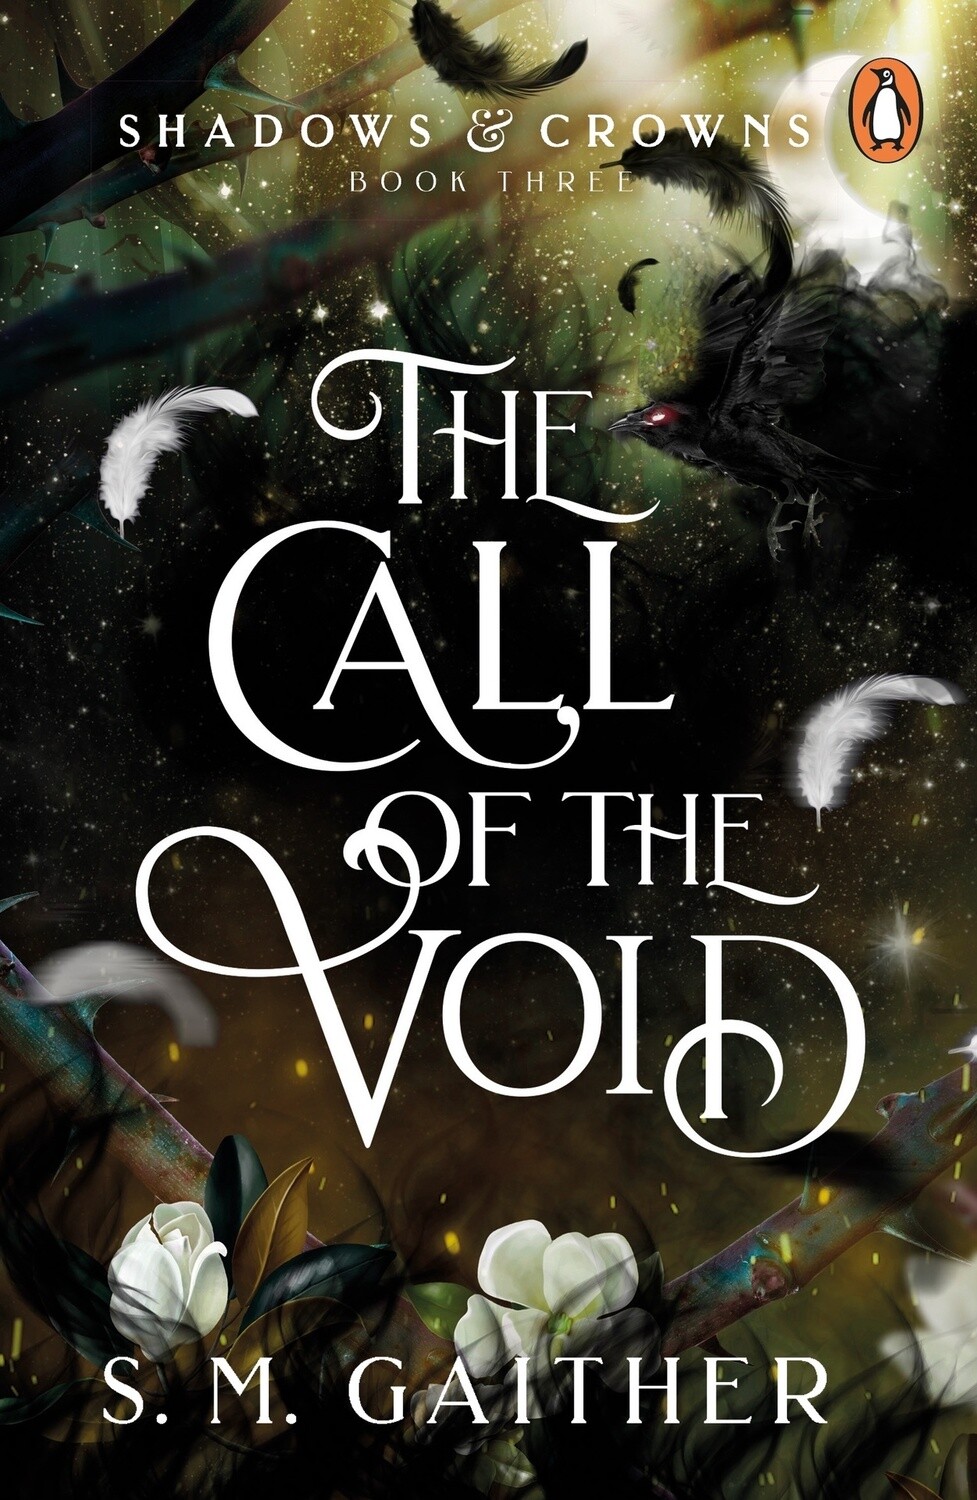 The Call of the Void (Shadow and Crowns  Book 3) by S. M. Gaither